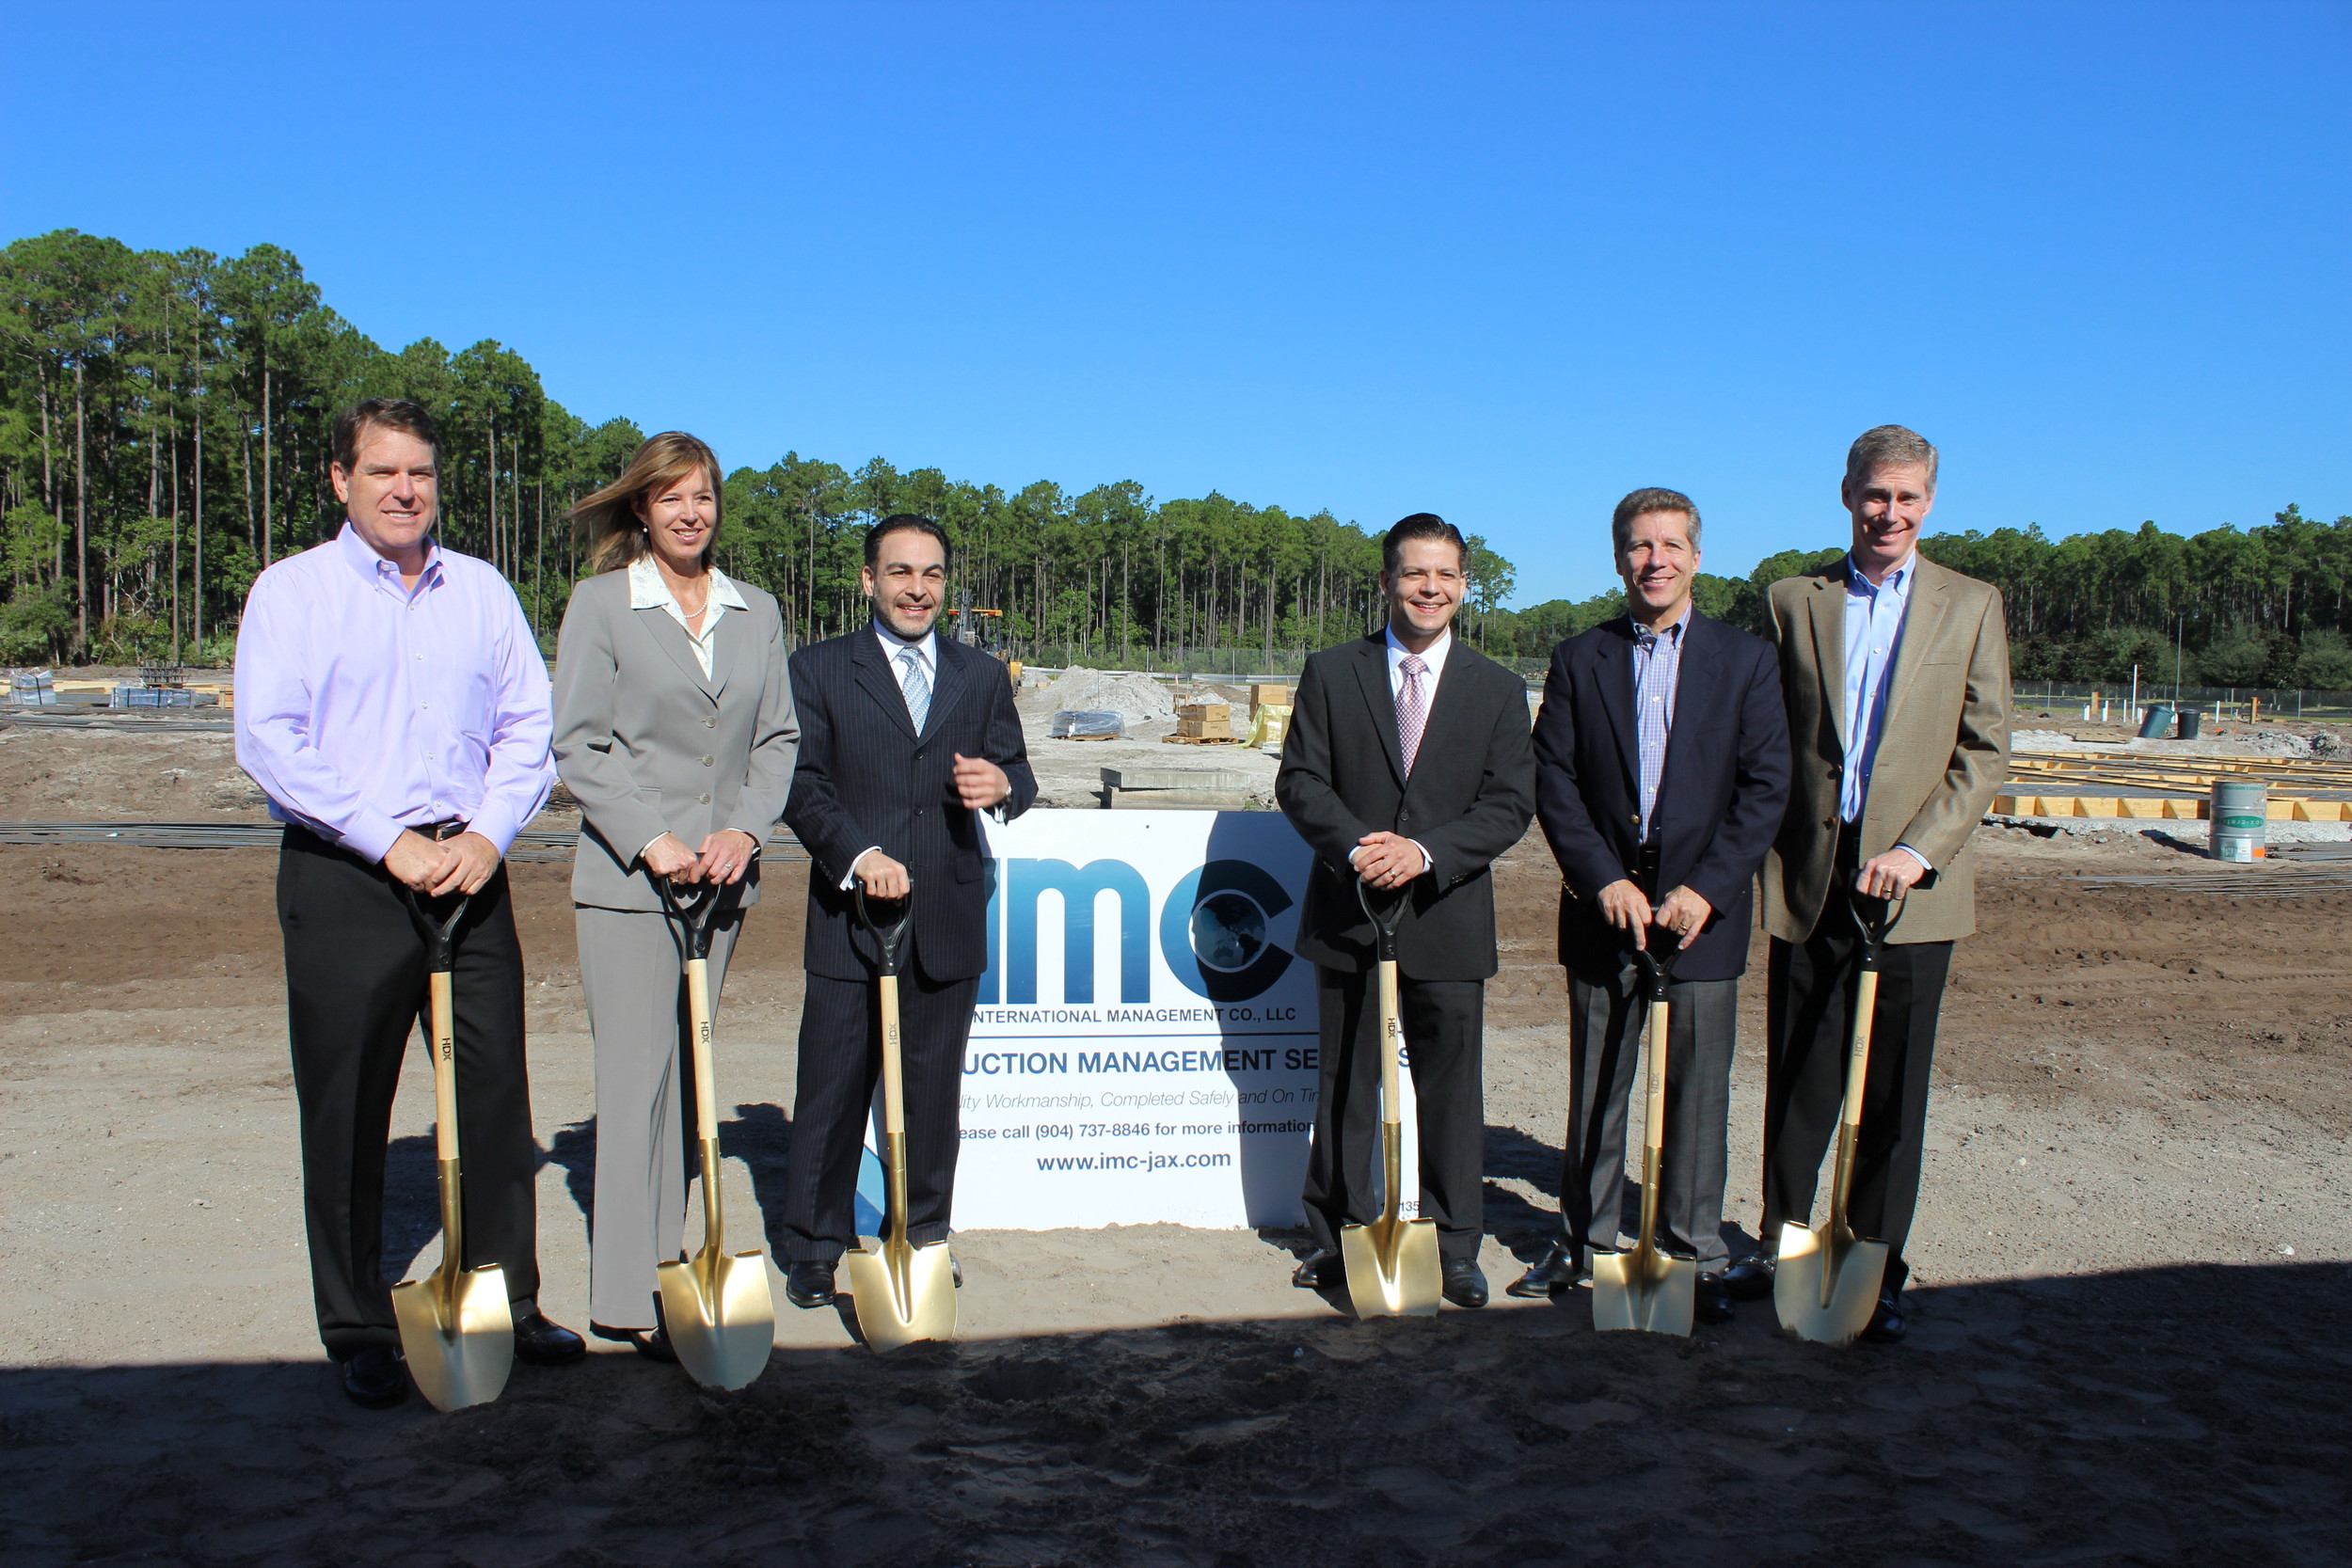 International Management Company (ICM) broke ground on a new three-story office building in the Nocatee community this week. The building is the second of three planned office spaces in Nocatee and will add more than 62,000 square feet of office space to the community. Pictured from left to right are Roger Osteen, Melissa Glasgow, Joe Saoud, Raja Saoud, Rick Ray and Greg Barbour.